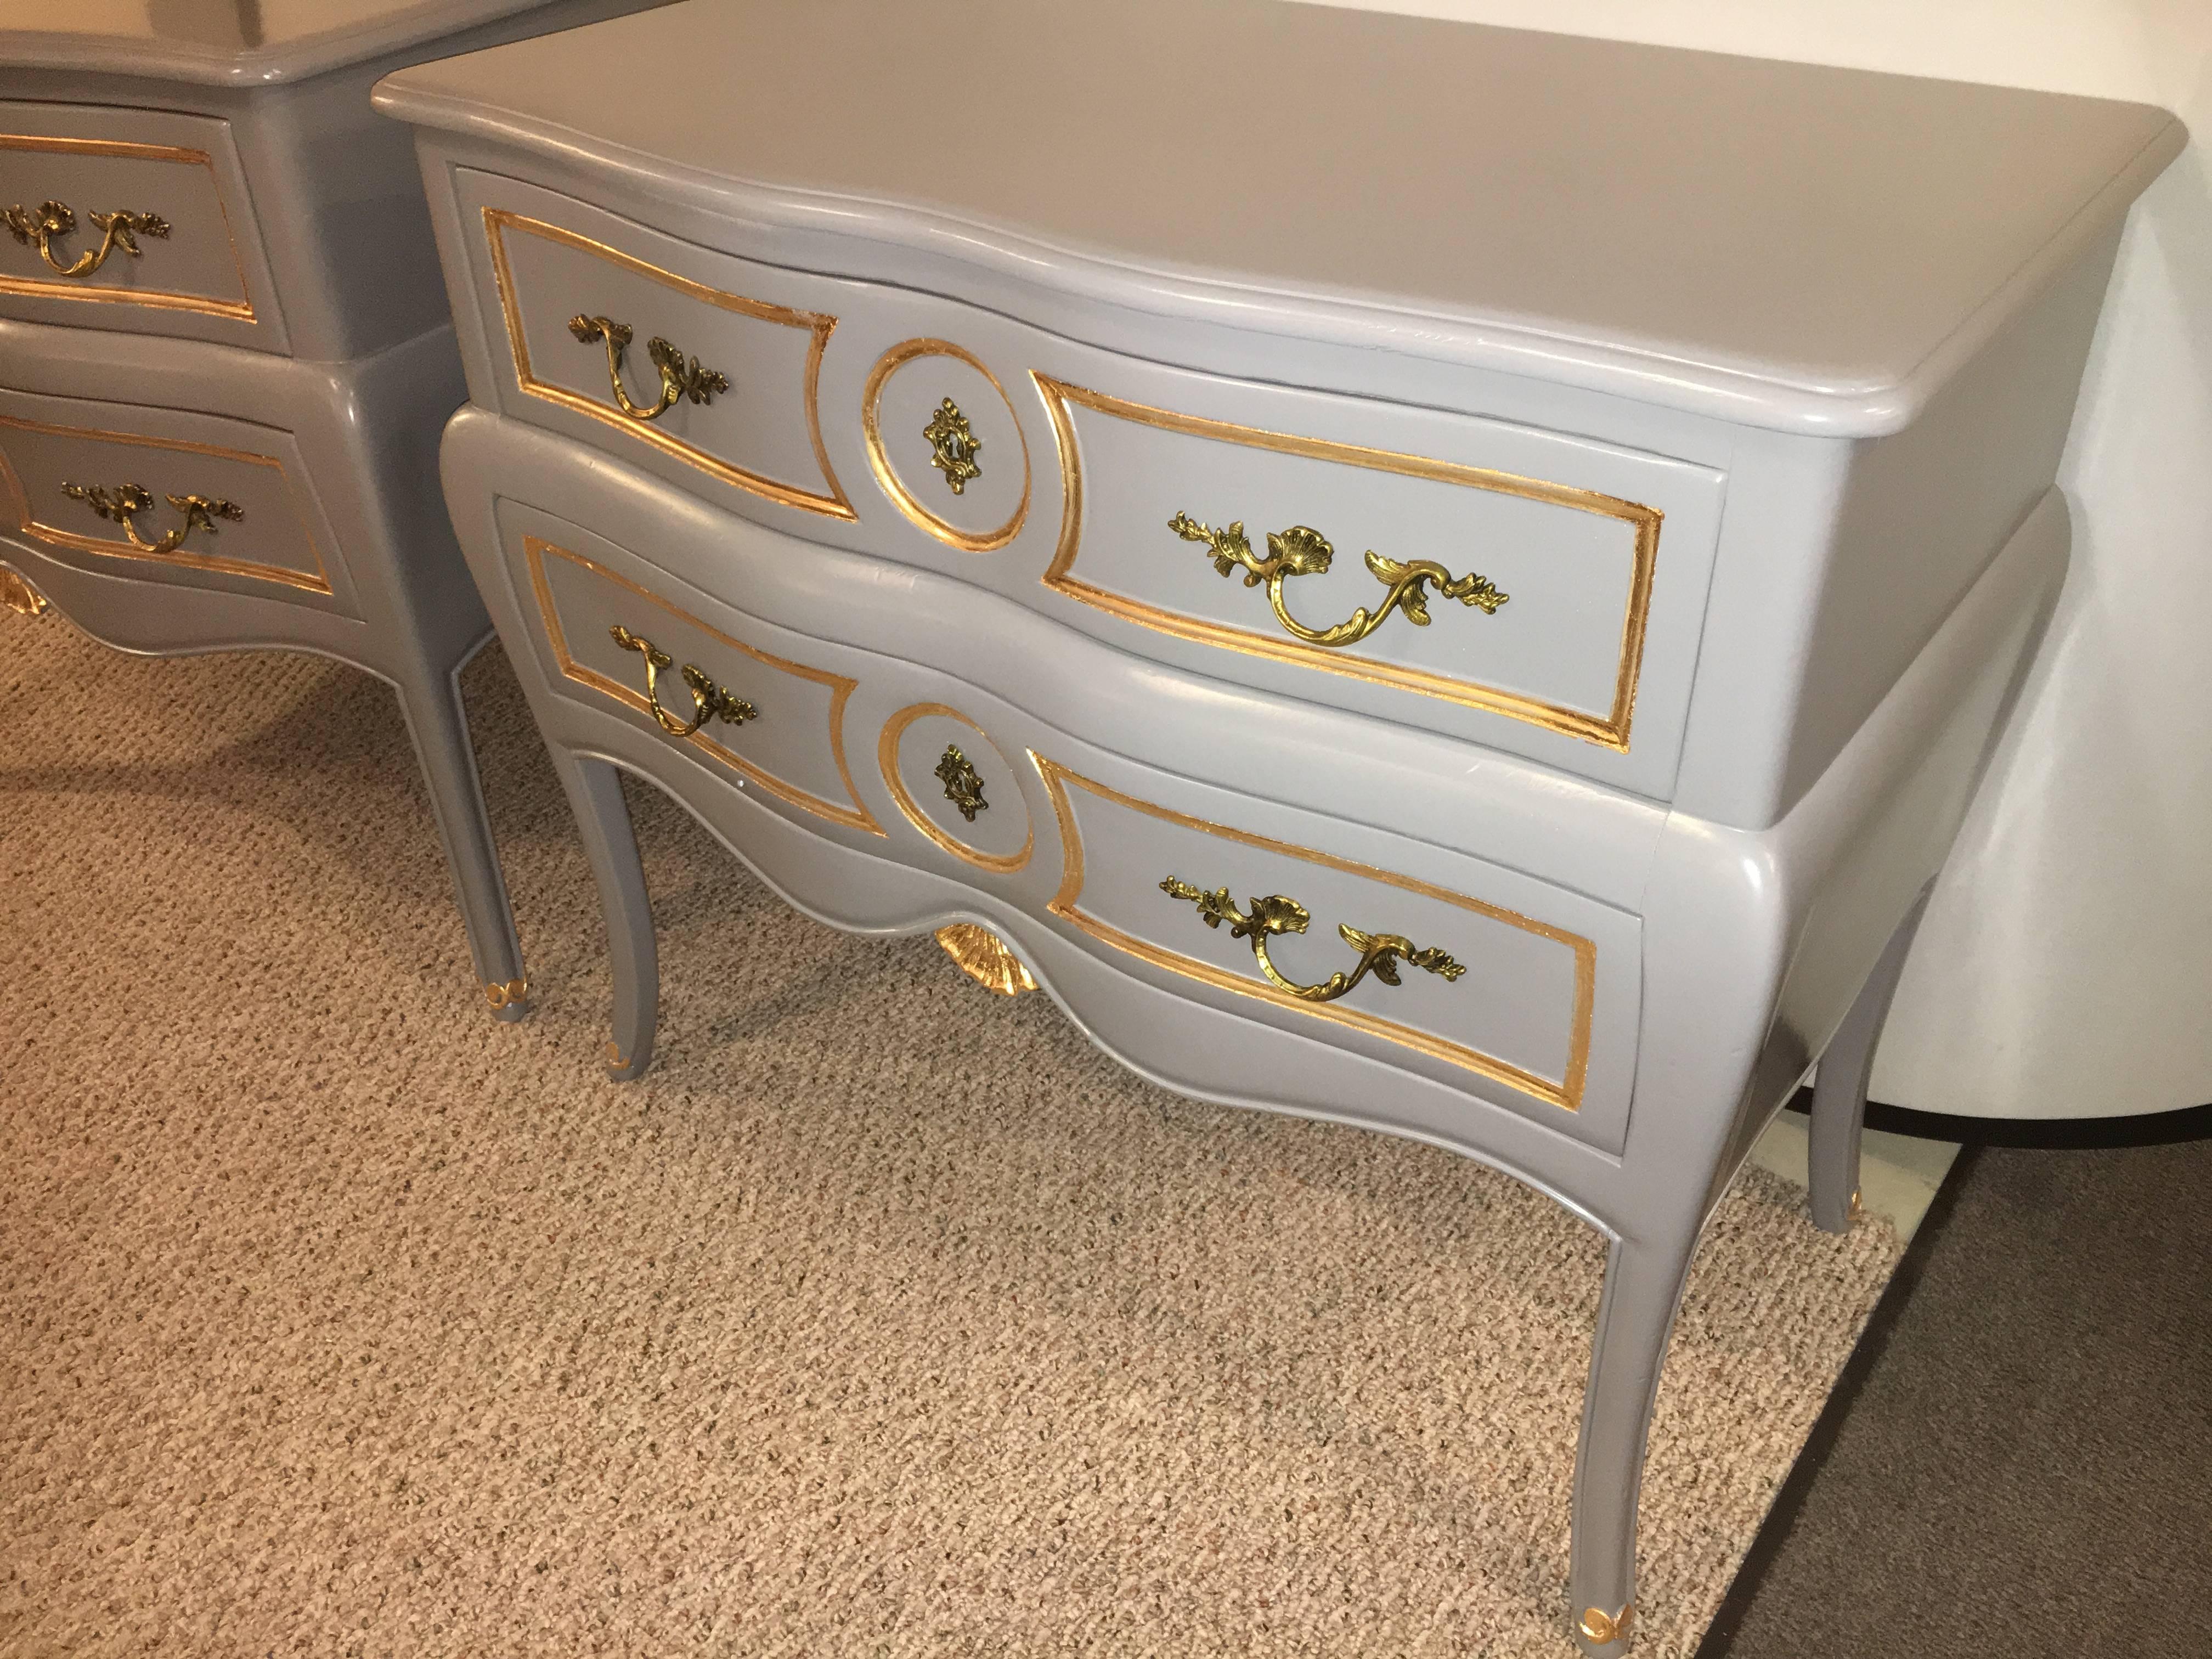 Pair of Louis XV style paint and gilt decorated commodes nightstands. These finely painted chests appear to be either by John Stuart or John Widdercomb. The double serpentine fronts having bronze pulls on two drawers. Each case painted in a slate